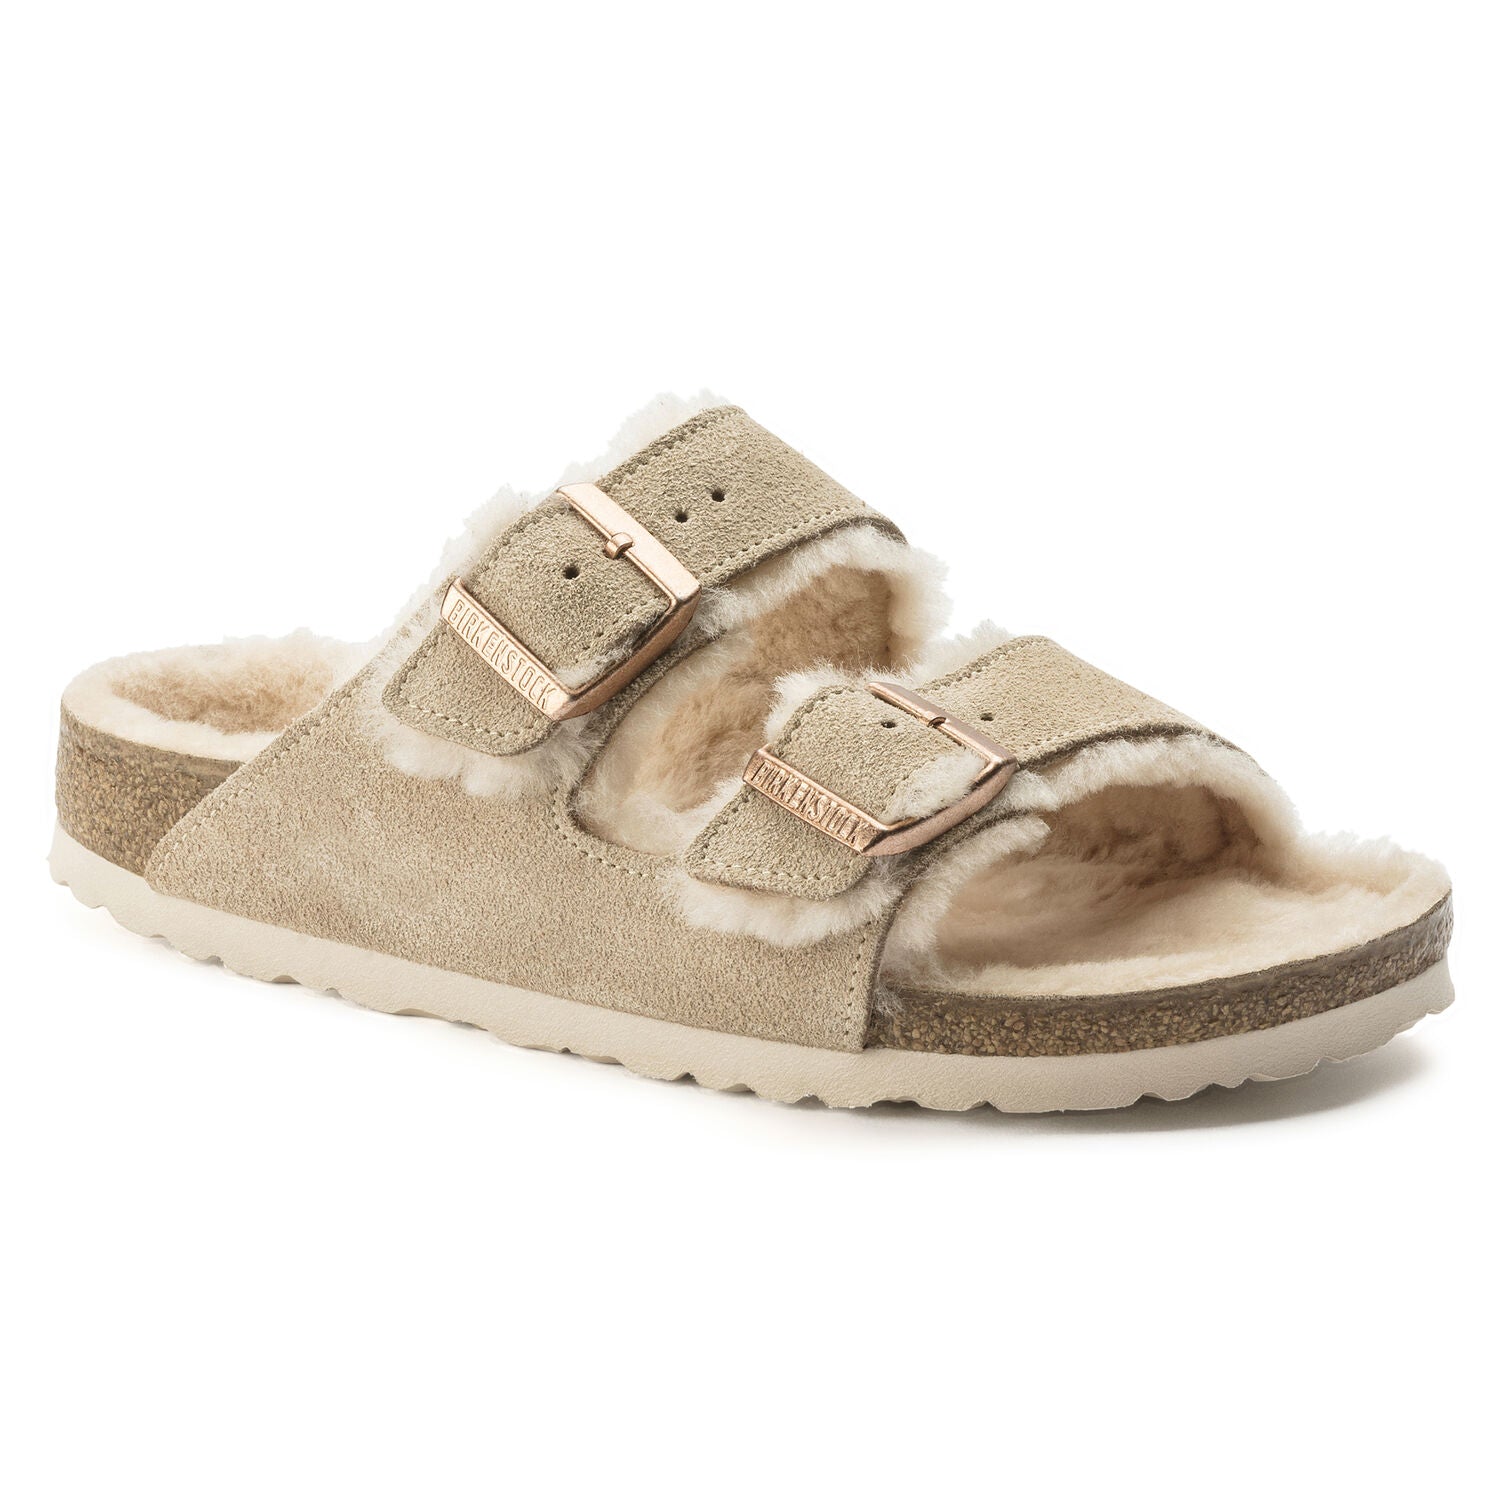 Where to Find the Sold-Out Shearling Birkenstocks Right Now